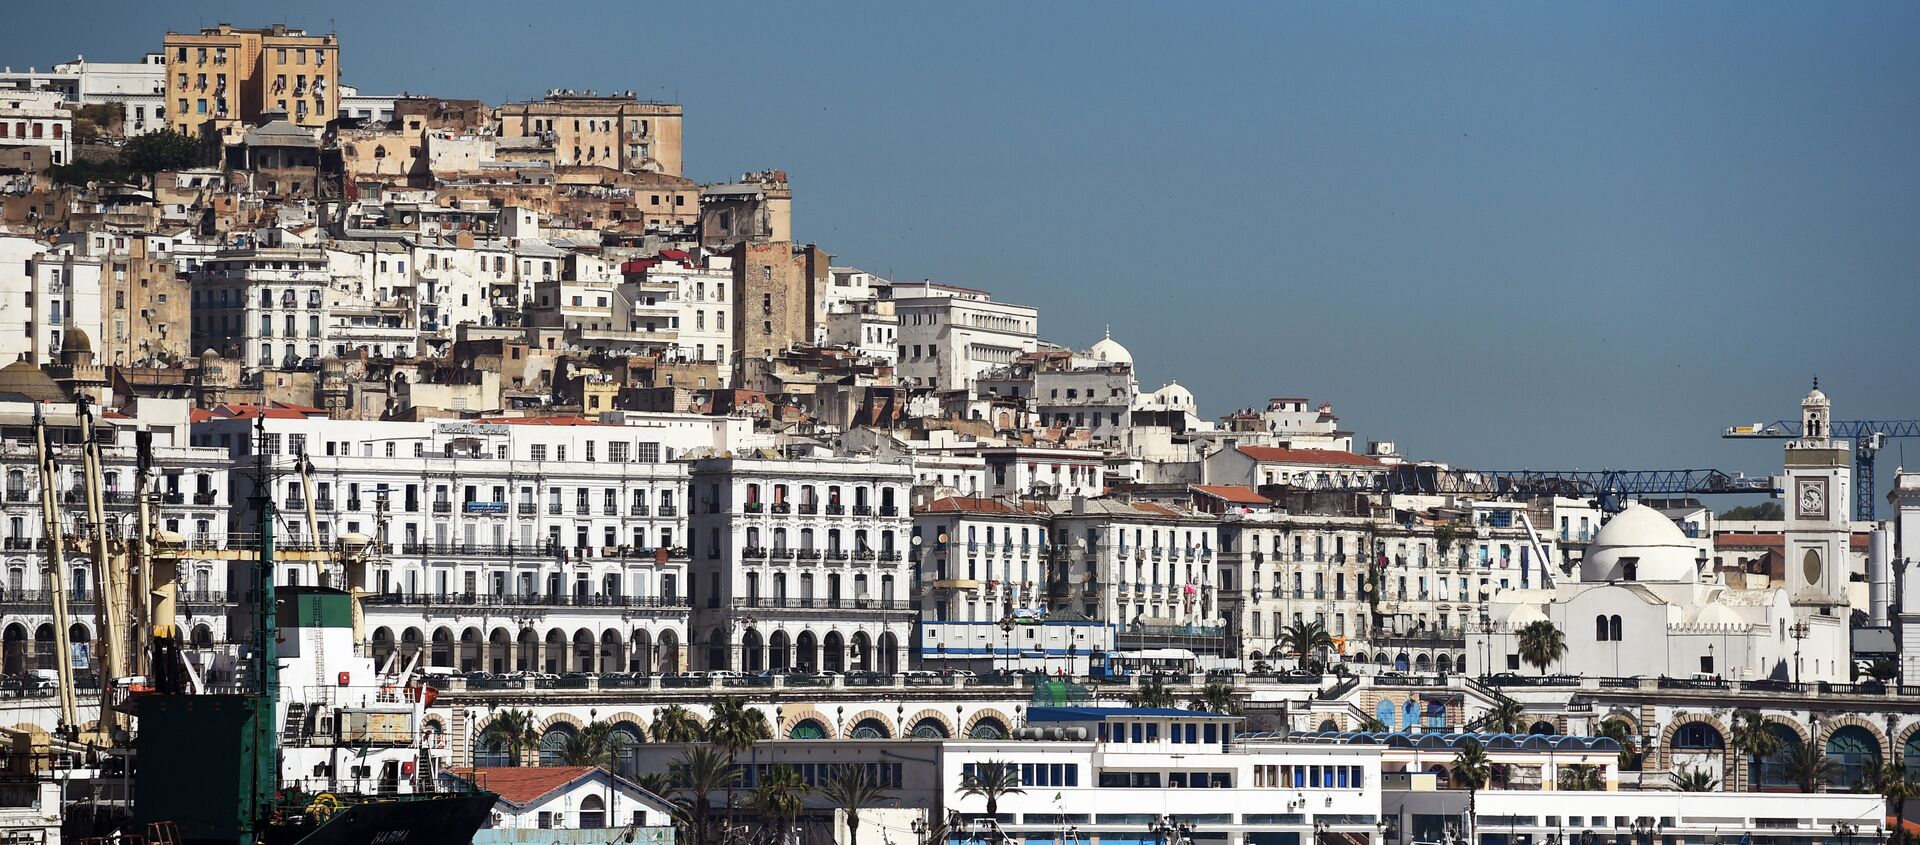 A general view taken on June 5, 2014 shows the Grand Mosque (R) situated on the promenade along the Bay of Algiers with the old town of the Algerian capital known as the Kasbah in the background. - Sputnik International, 1920, 21.01.2021